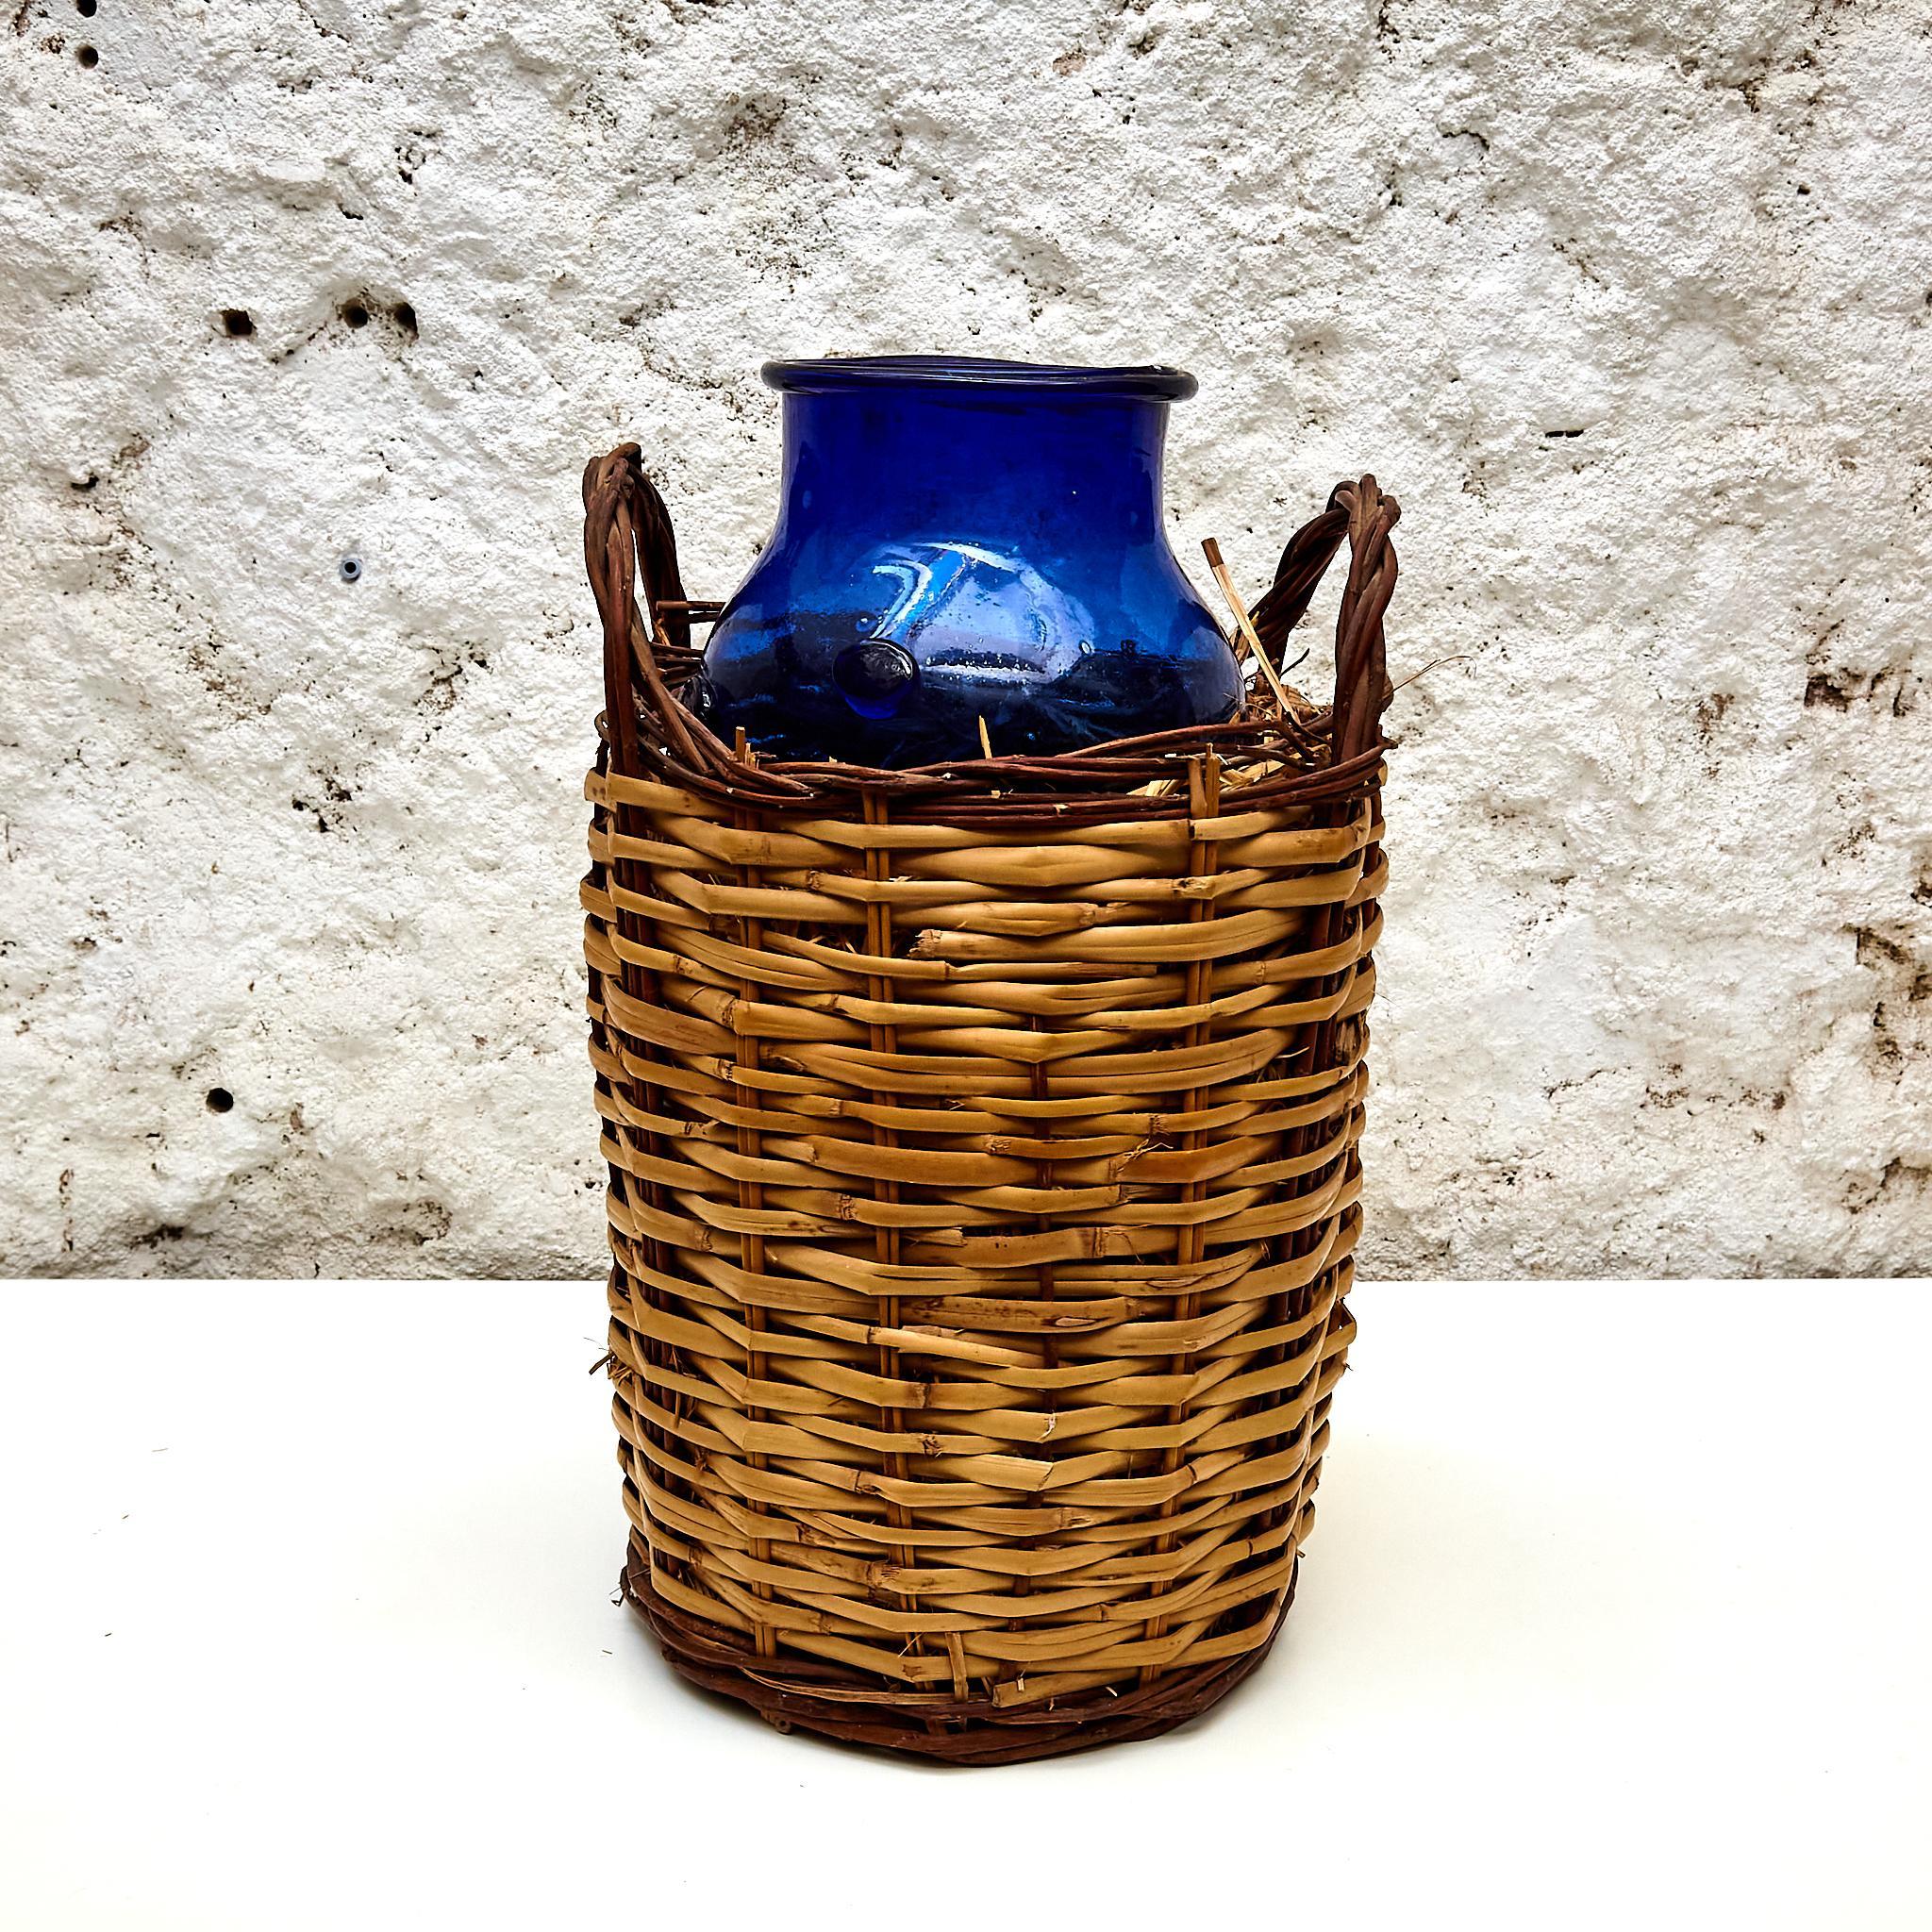 Blue glass bottle with wicker basket.

Manufactured in France, circa 1930.

In original condition with minor wear consistent of age and use, preserving a beautiful patina.

Materials: 
Glass, wicker.

Dimensions: 
Basket: Diam. 24 cm x H 38